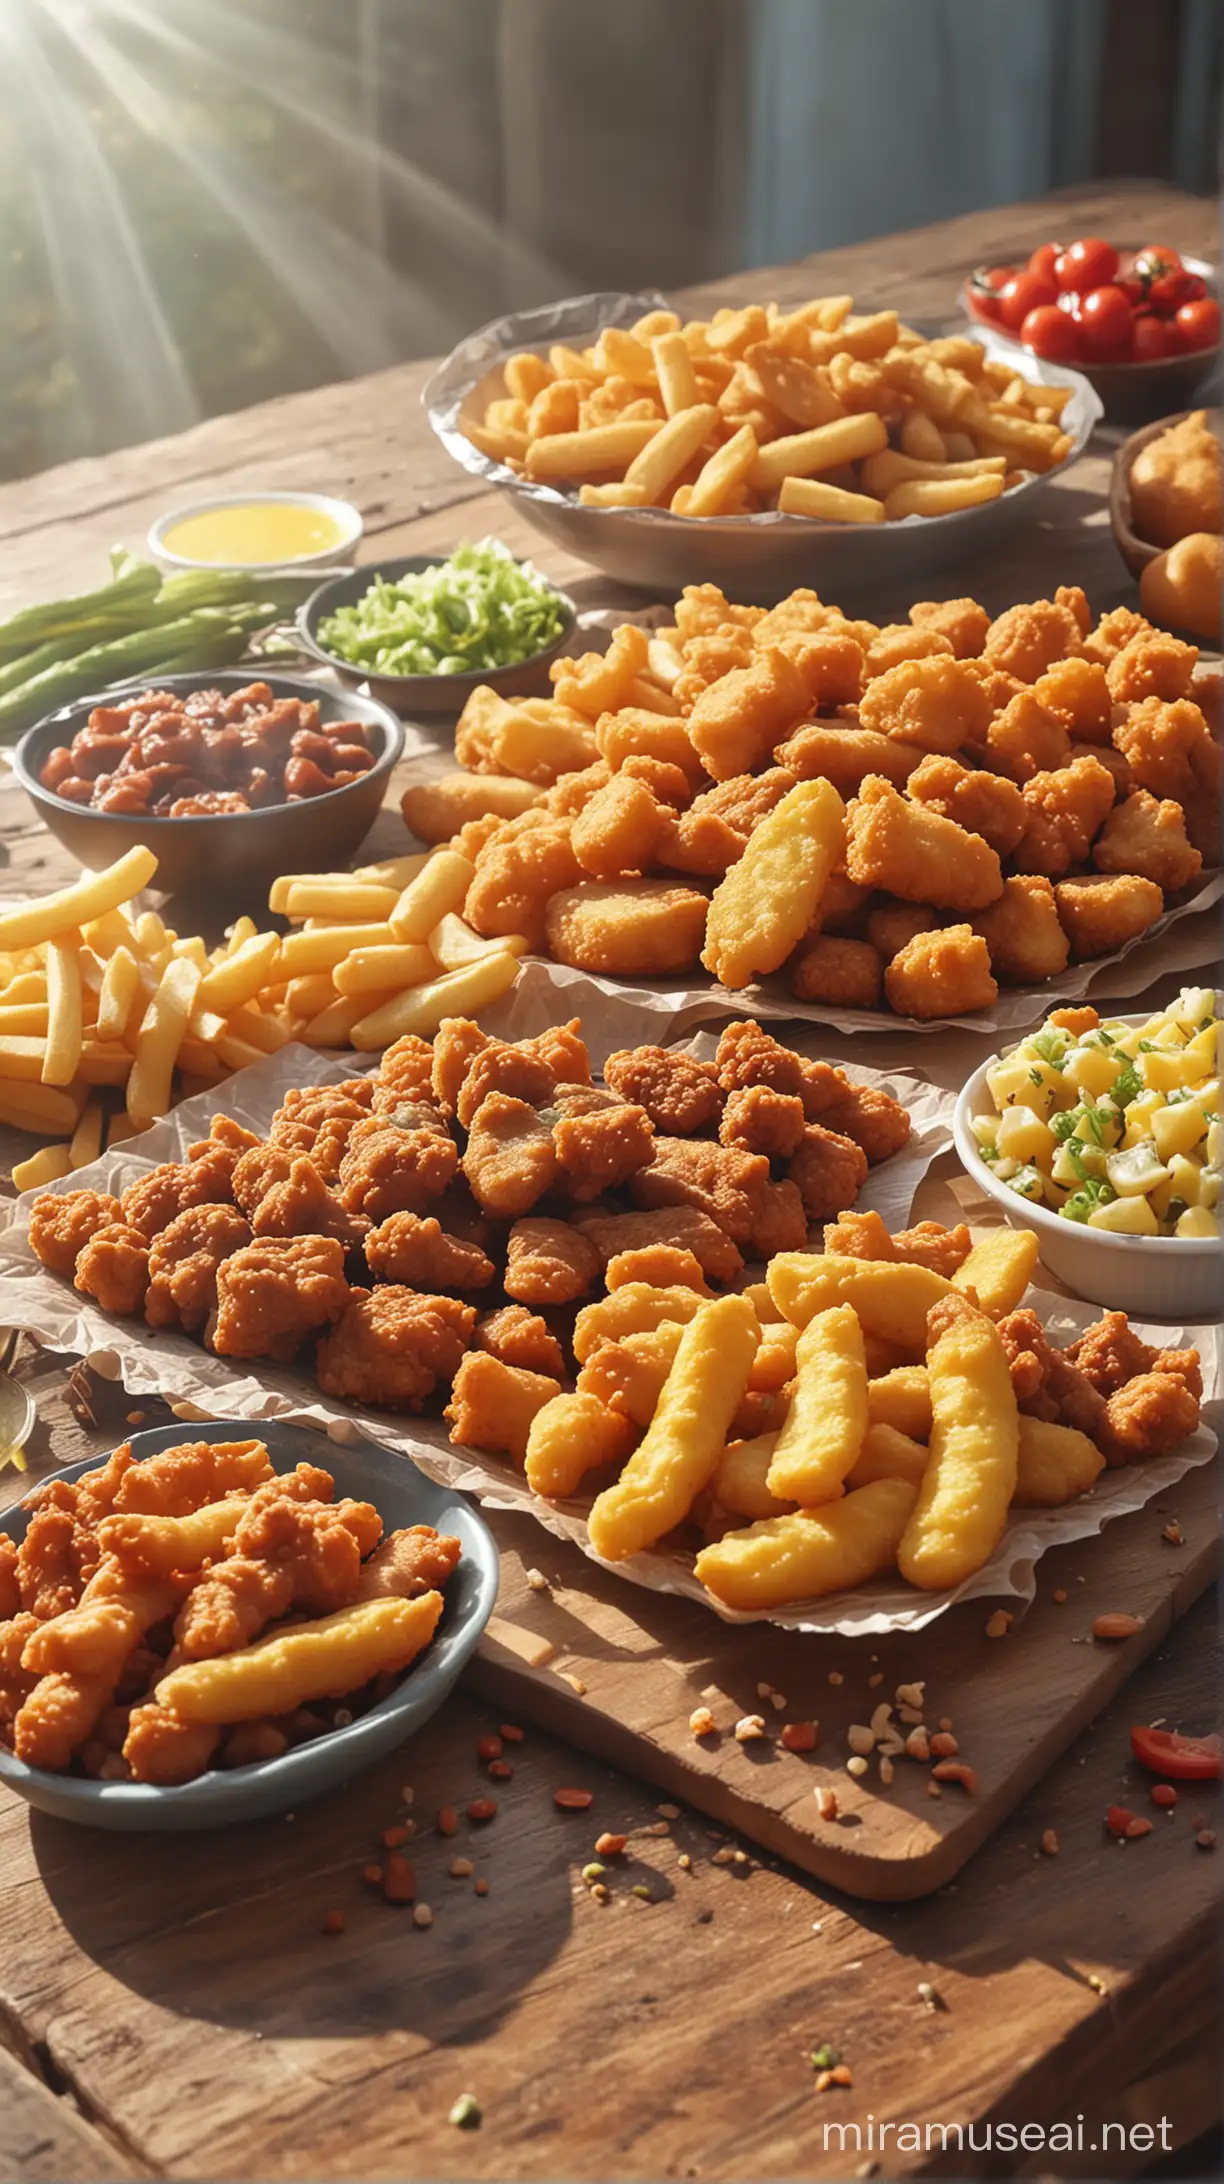 Delicious Fried Foods on Table with Natural Background and Sunlight Effect